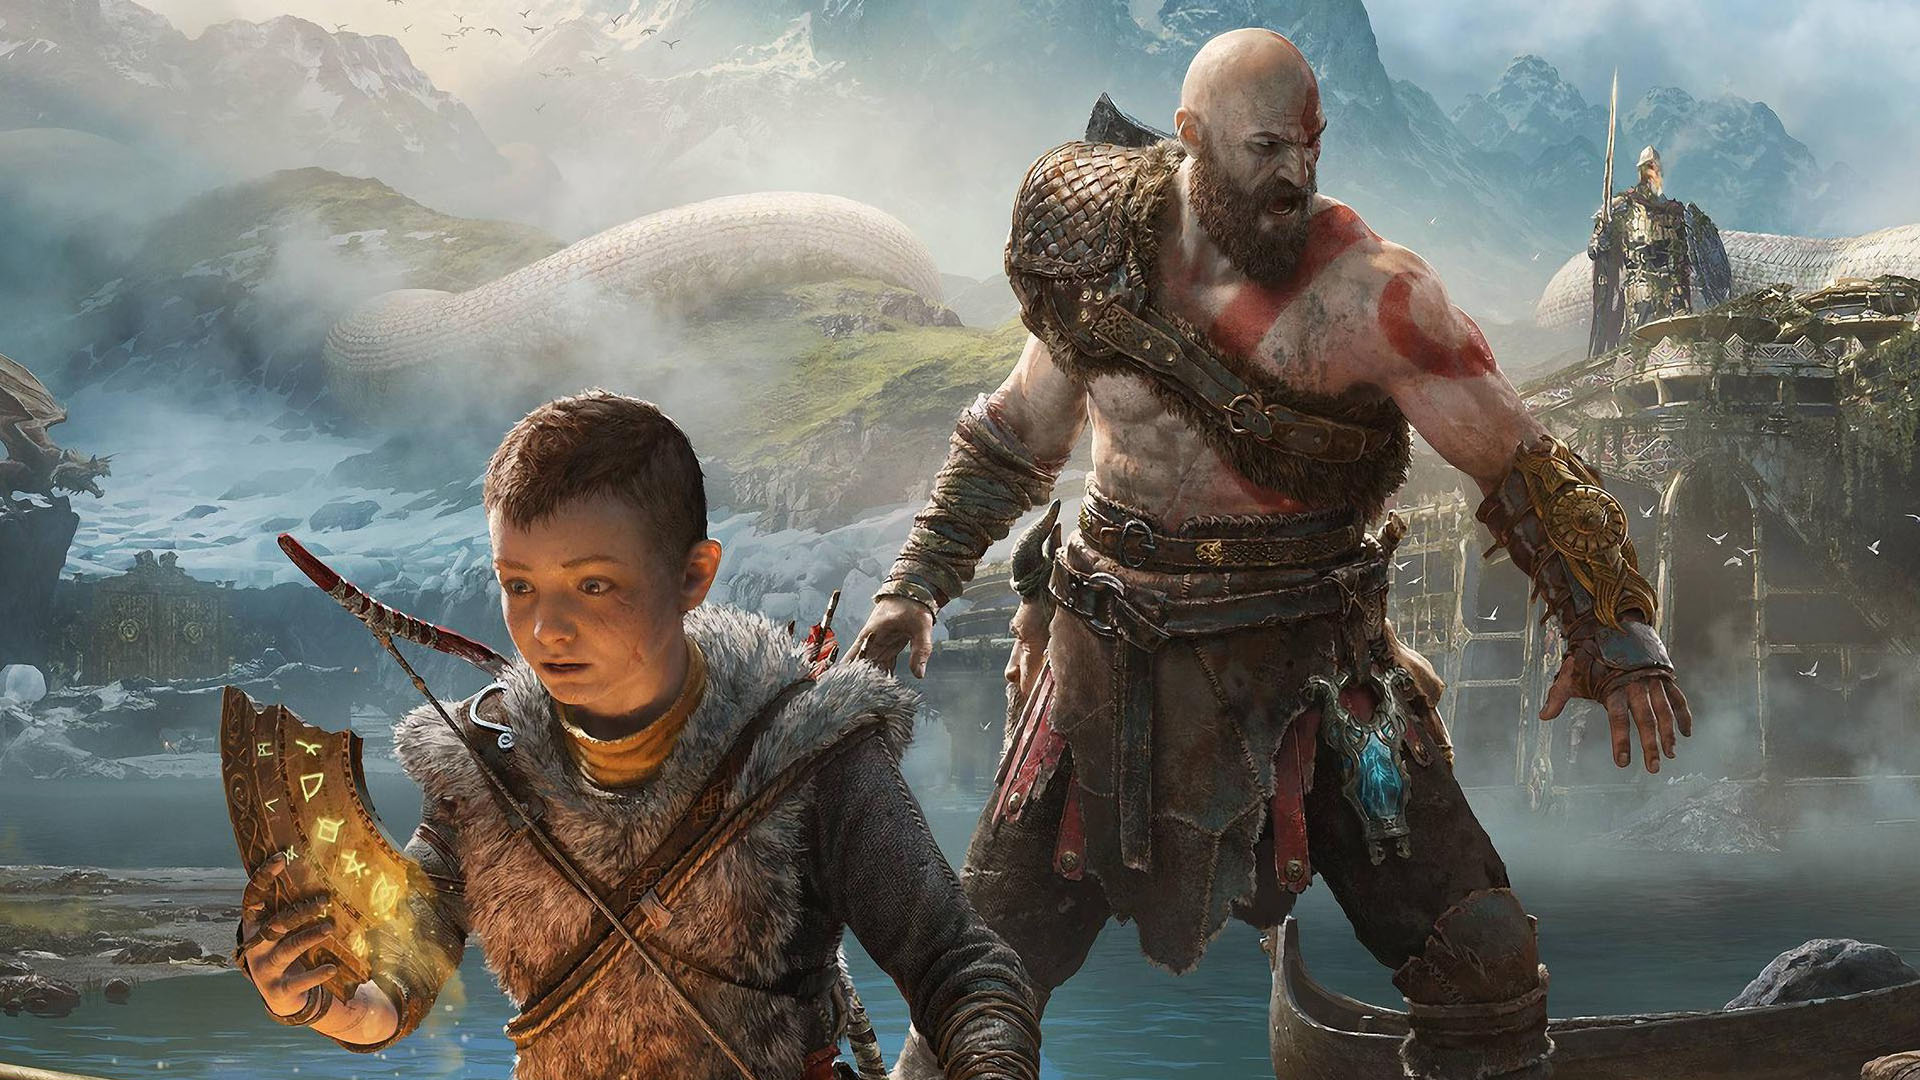 God of War: Ragnarok DLC is reportedly in the works